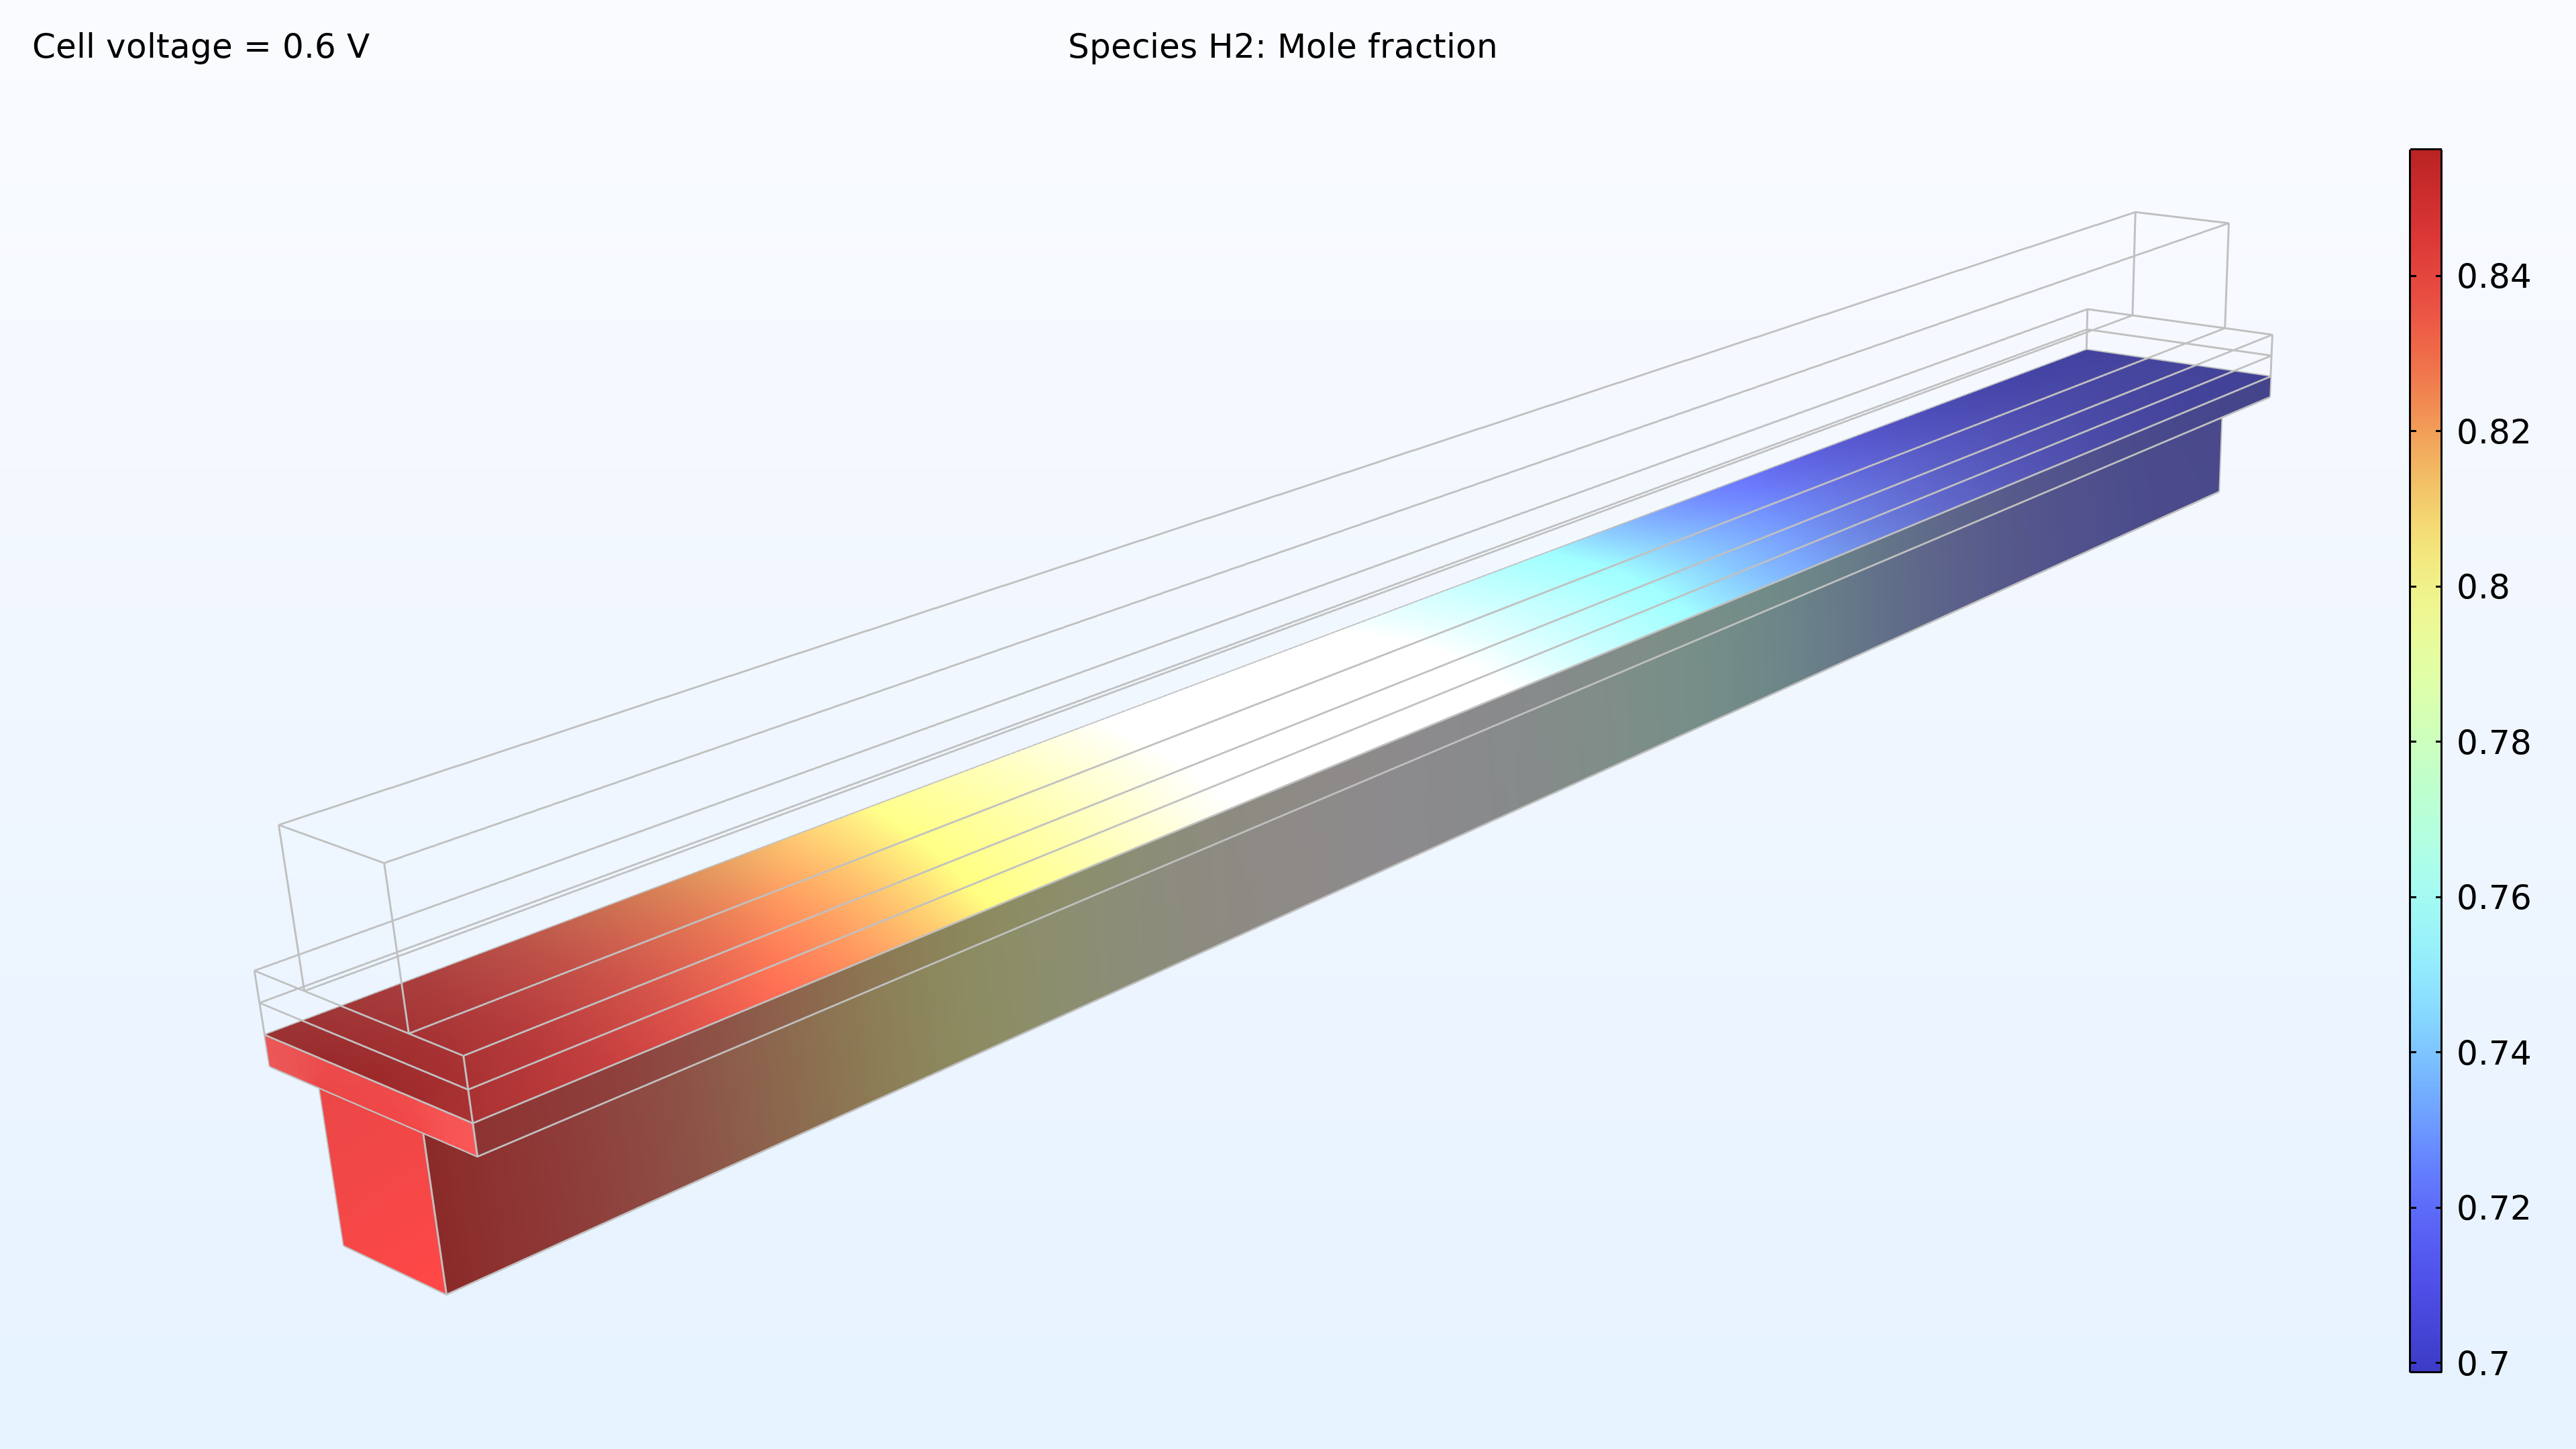 A plot showing the hydrogen mole fraction at the anode with a rainbow color scale, where the leftmost side of the model is red, the middle is white, and the rightmost side is blue.